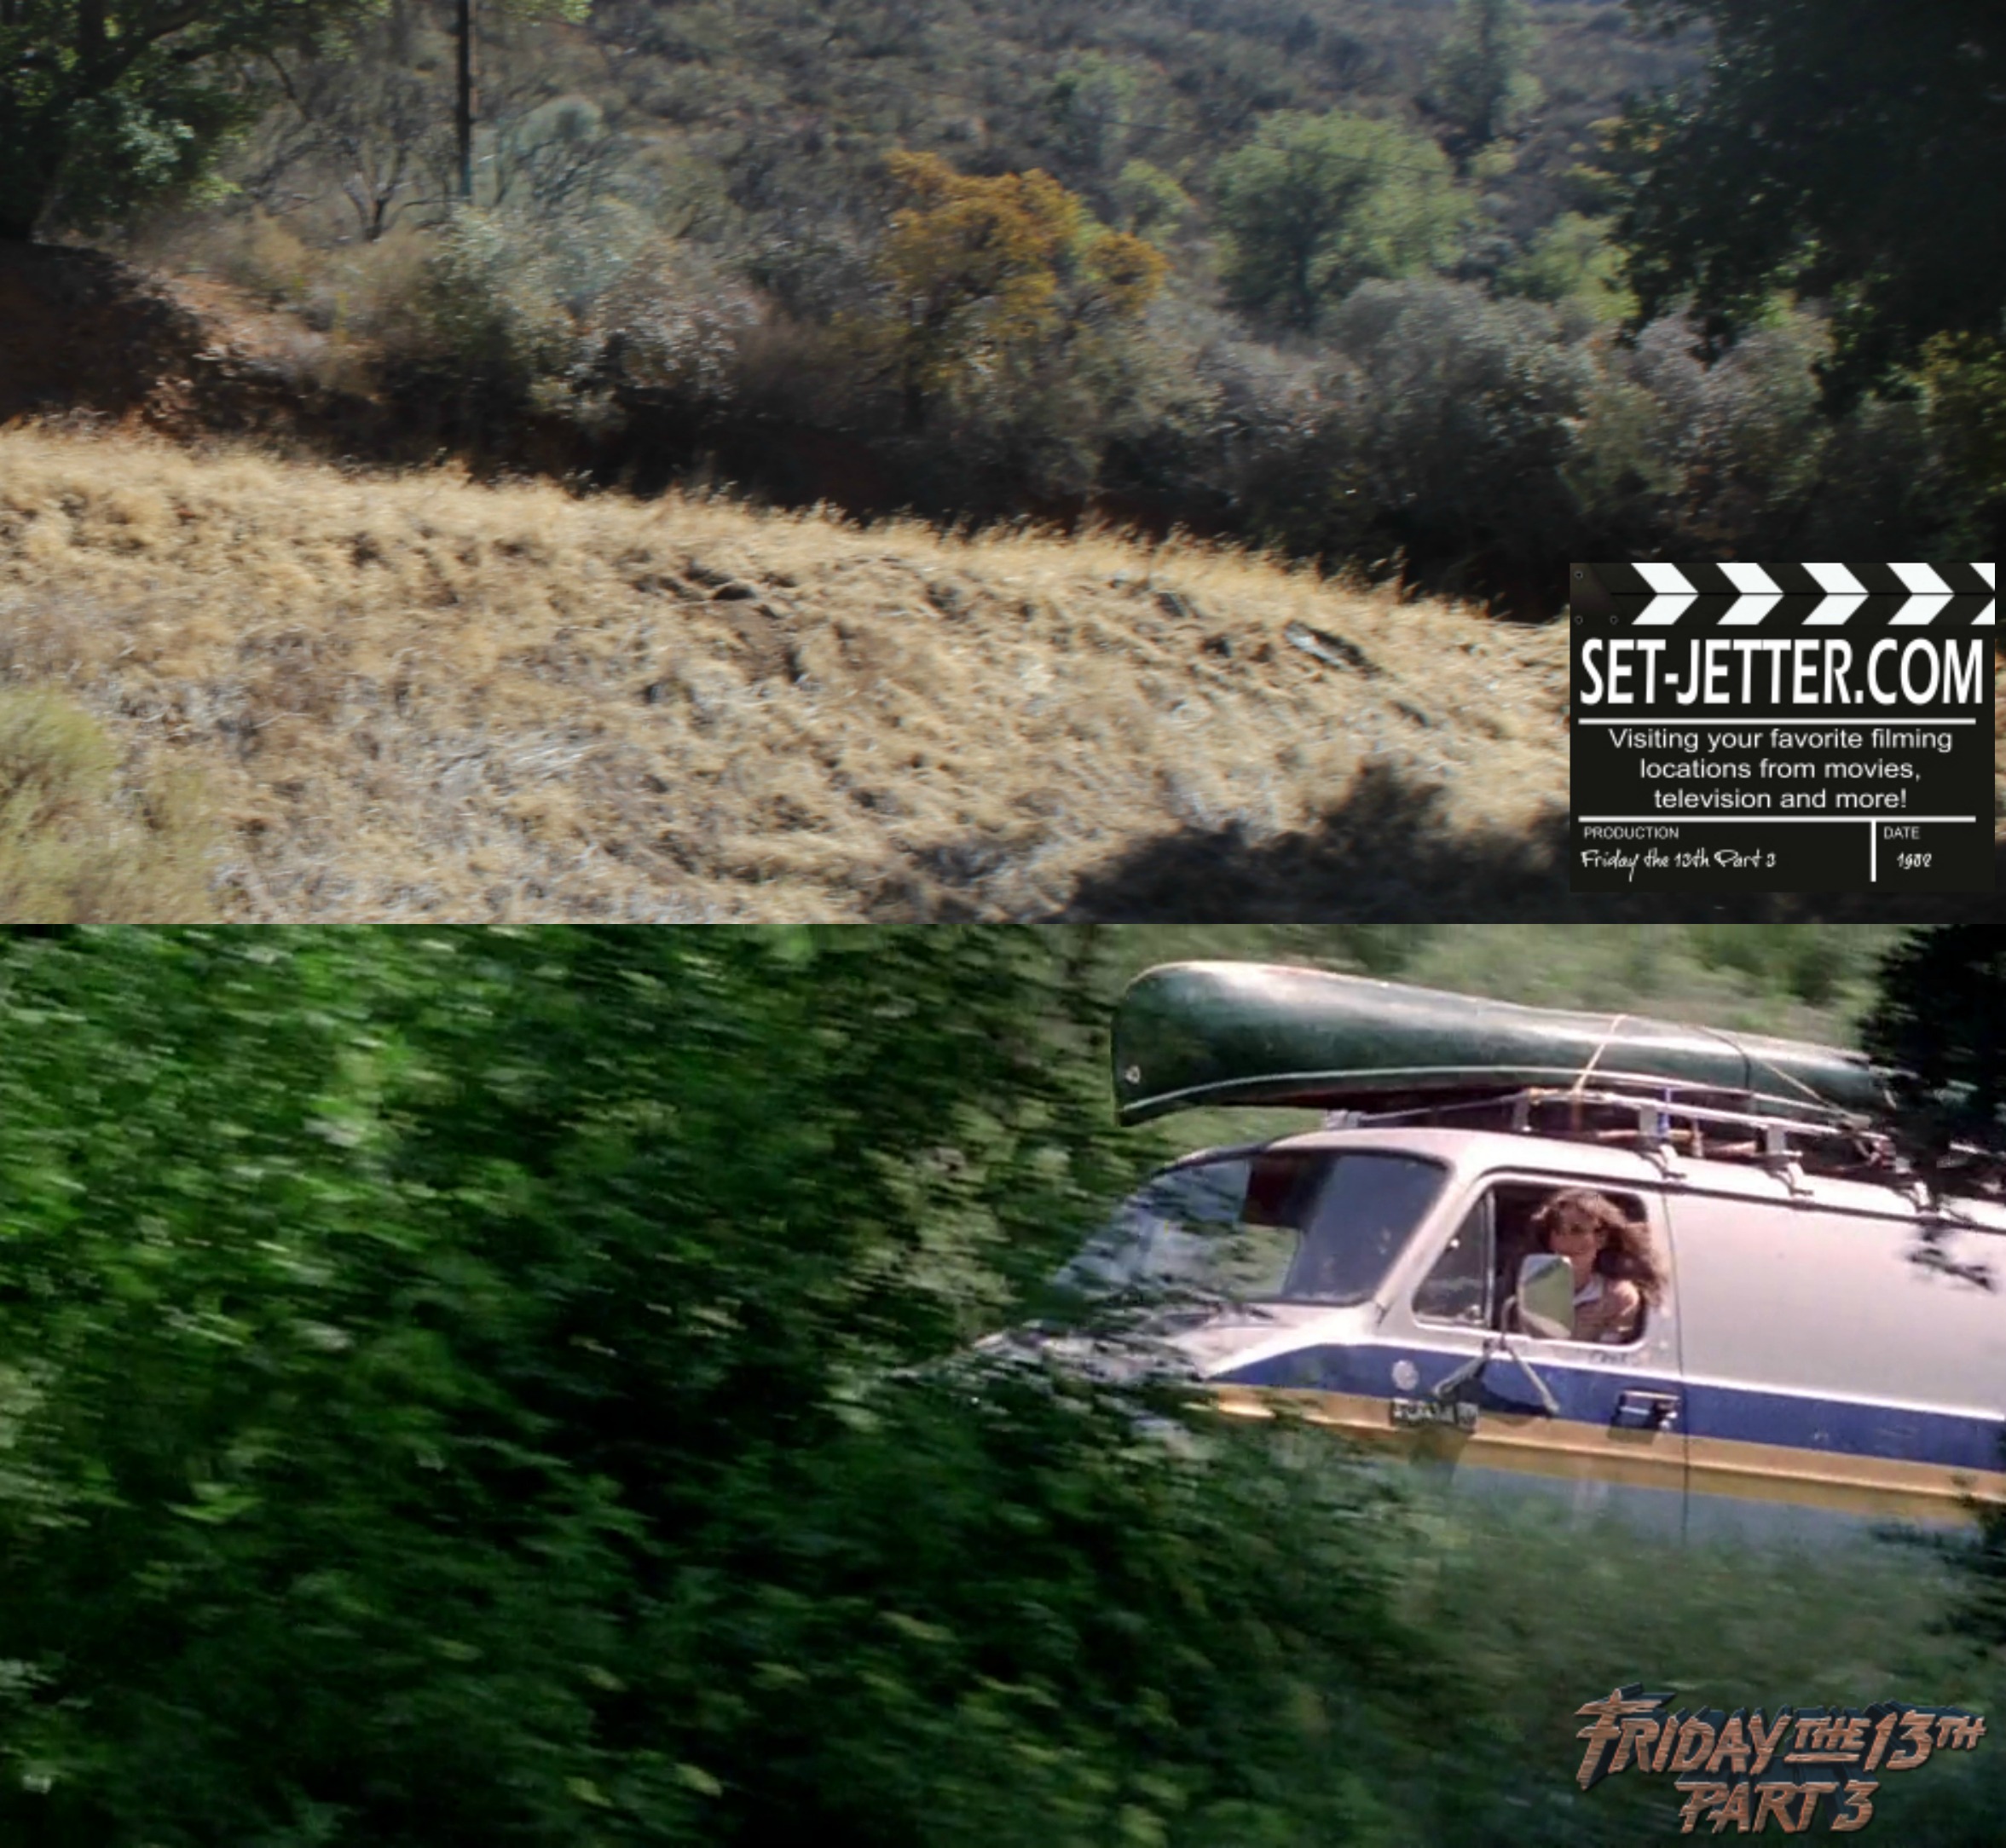 Friday the 13th Part 3 comparison 222.jpg